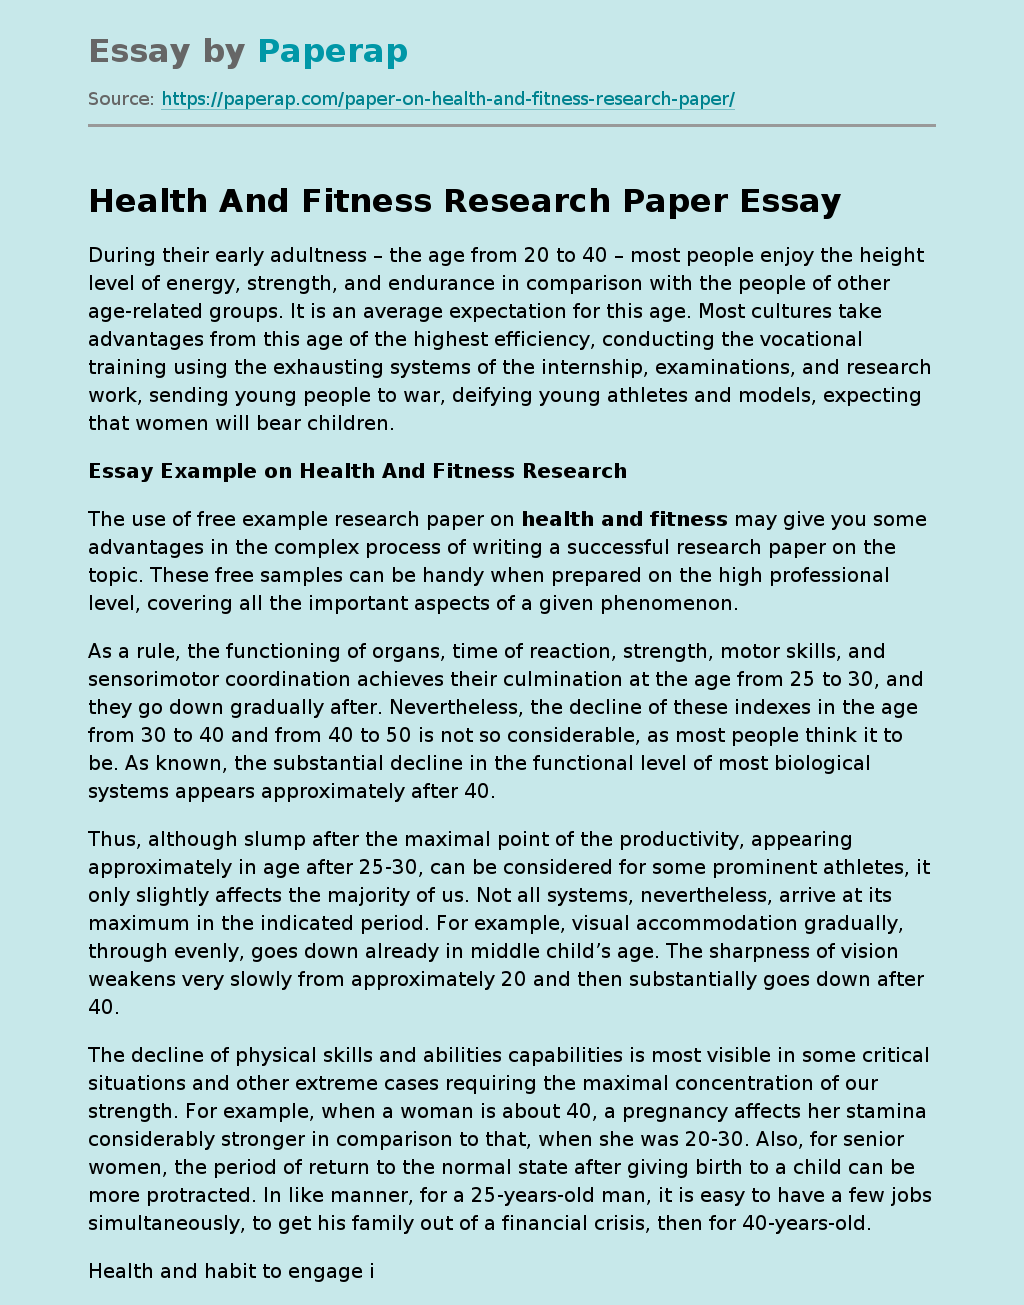 Health And Fitness Research Paper